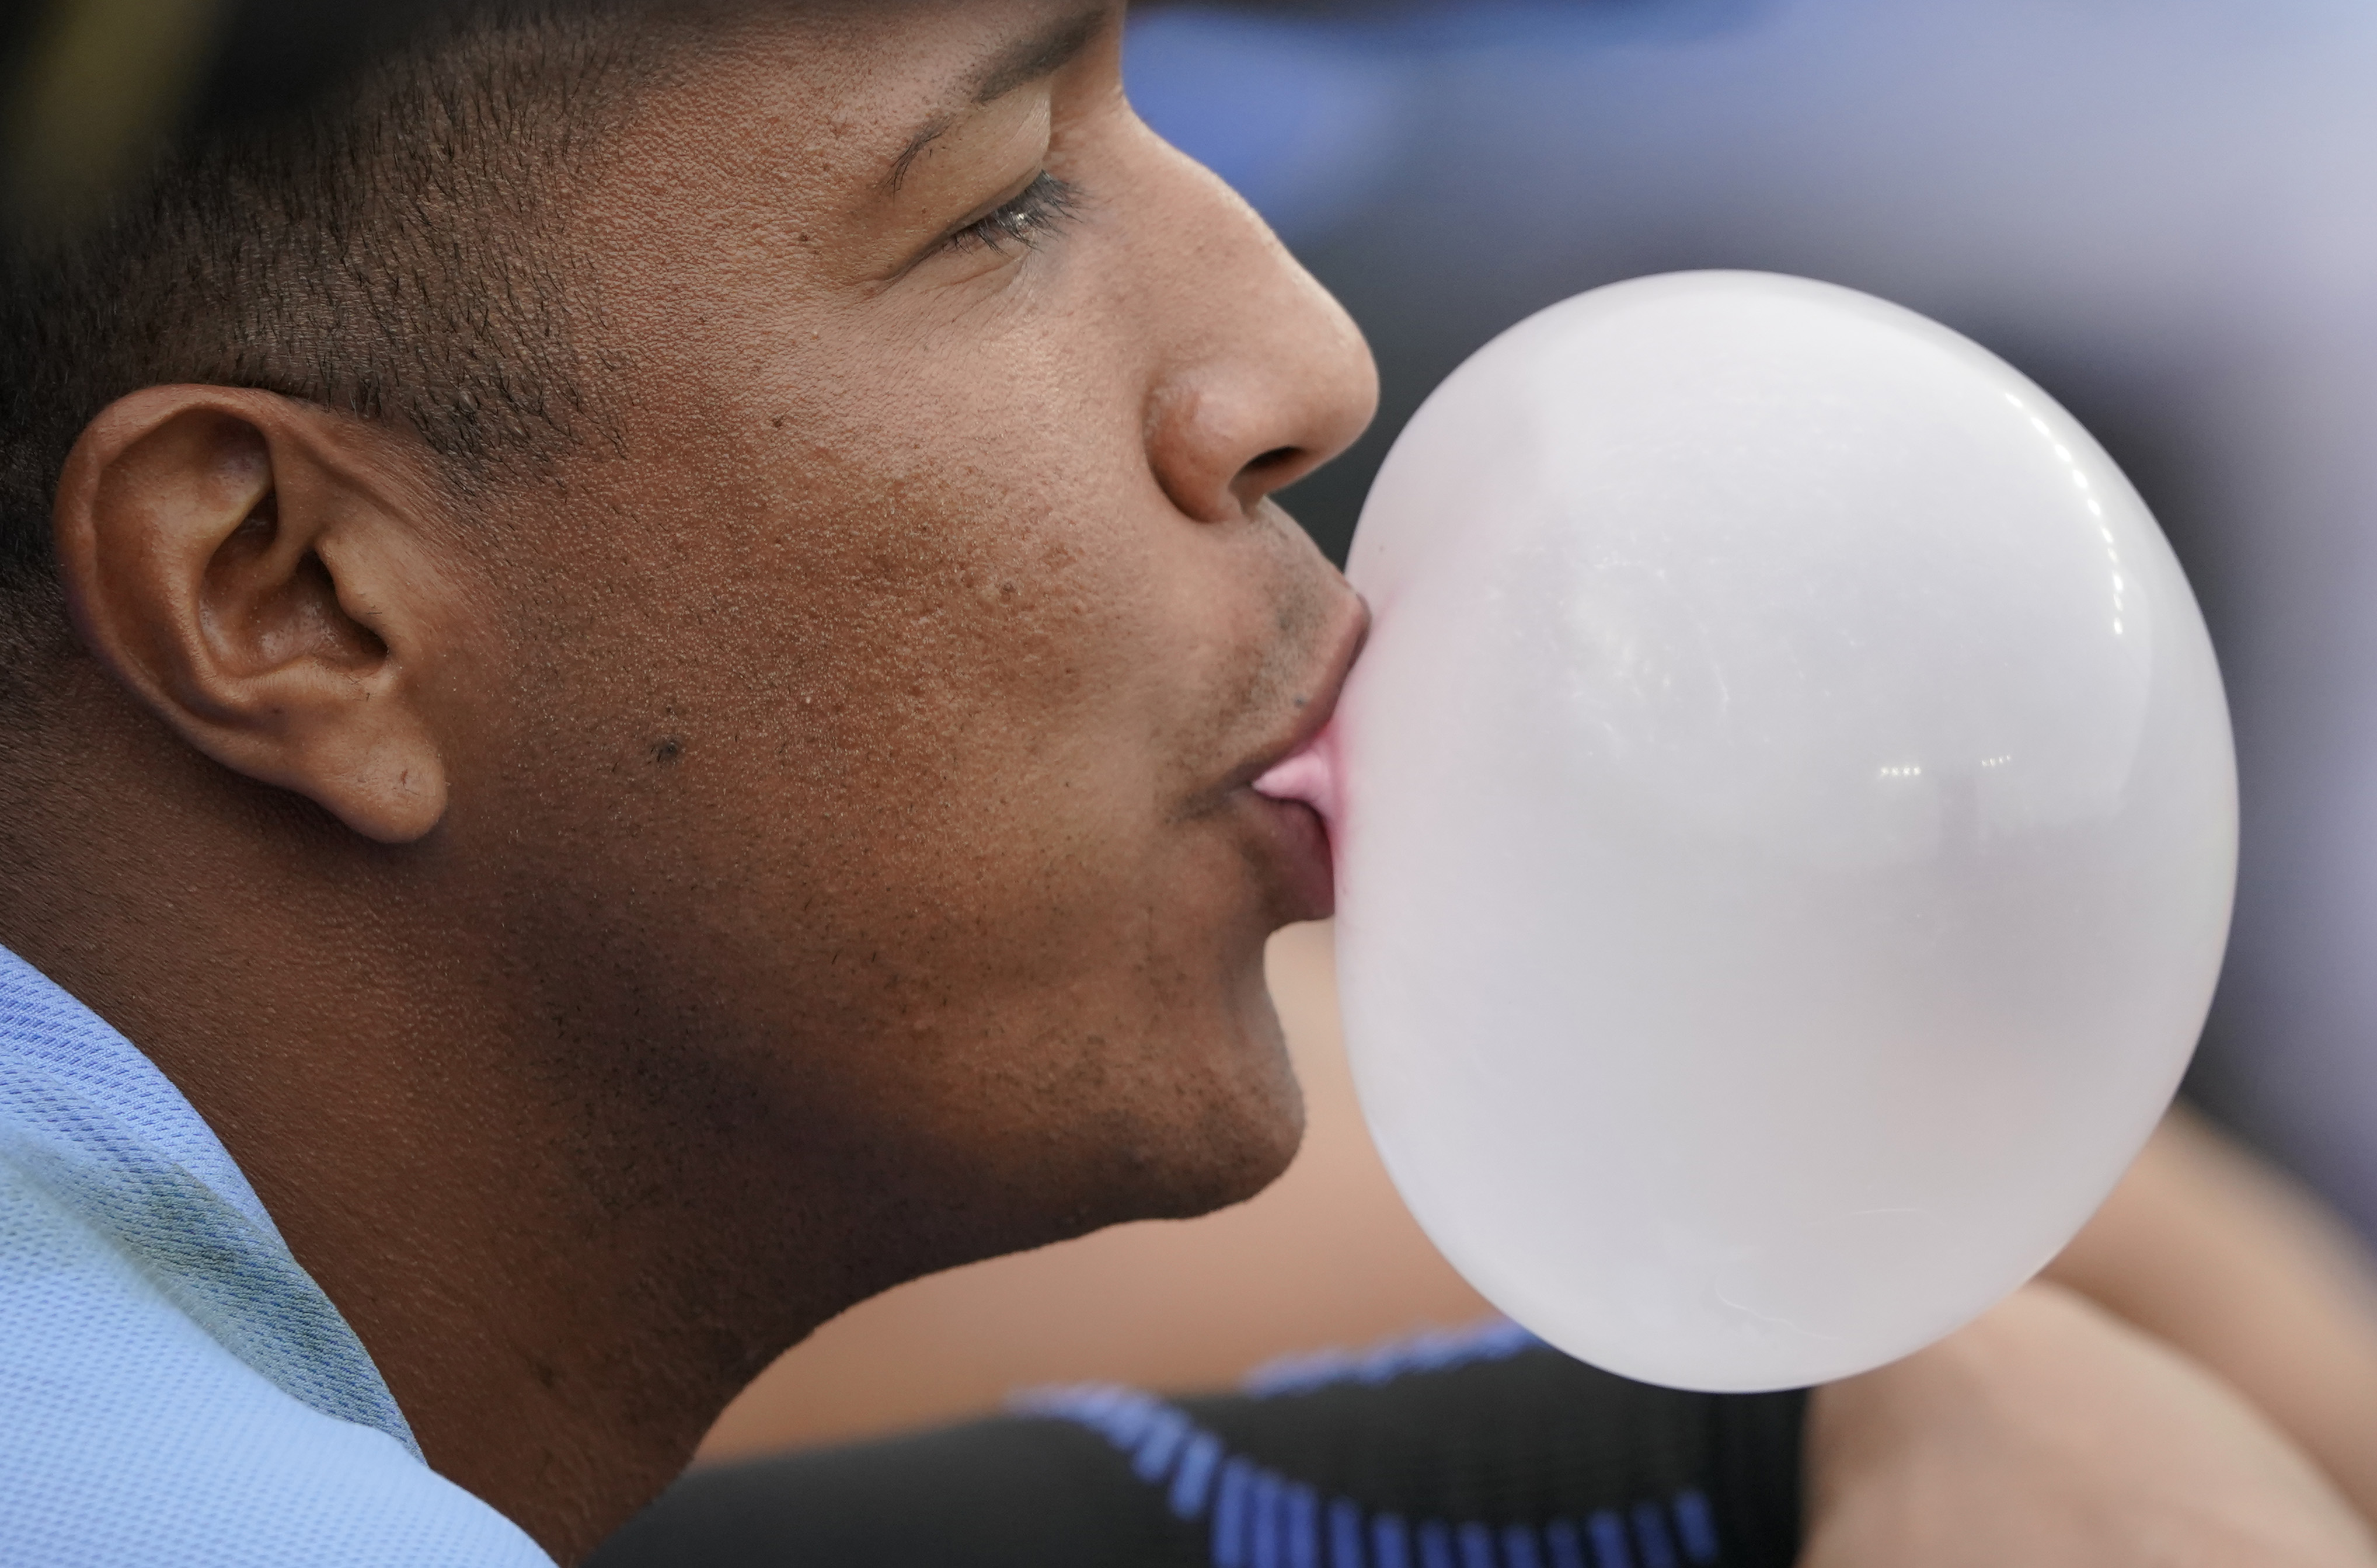 Salvador Perez #13 of the Kansas City Royals blows a bubble during the ninth inning during a game against the Minnesota Twins at Kauffman Stadium on September 22, 2022 in Kansas City, Missouri.